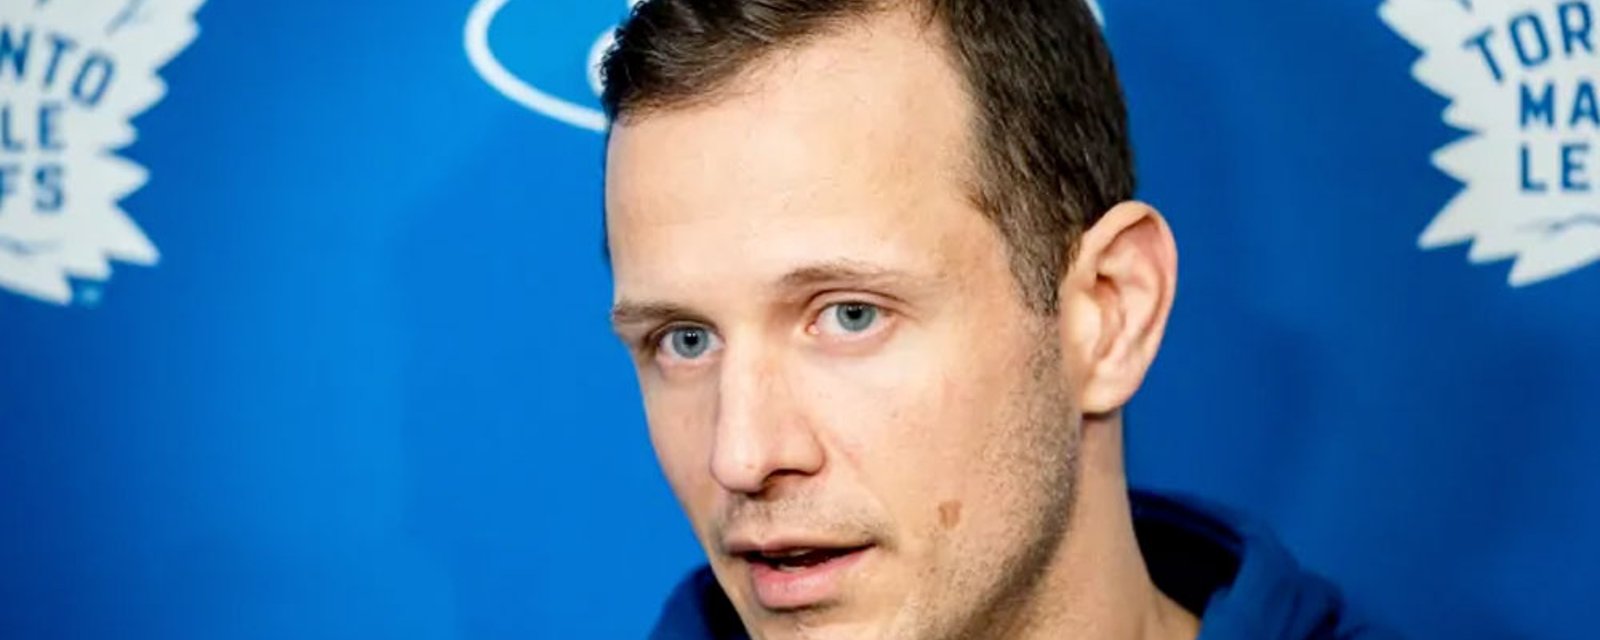 Spezza on the waiver wire next?